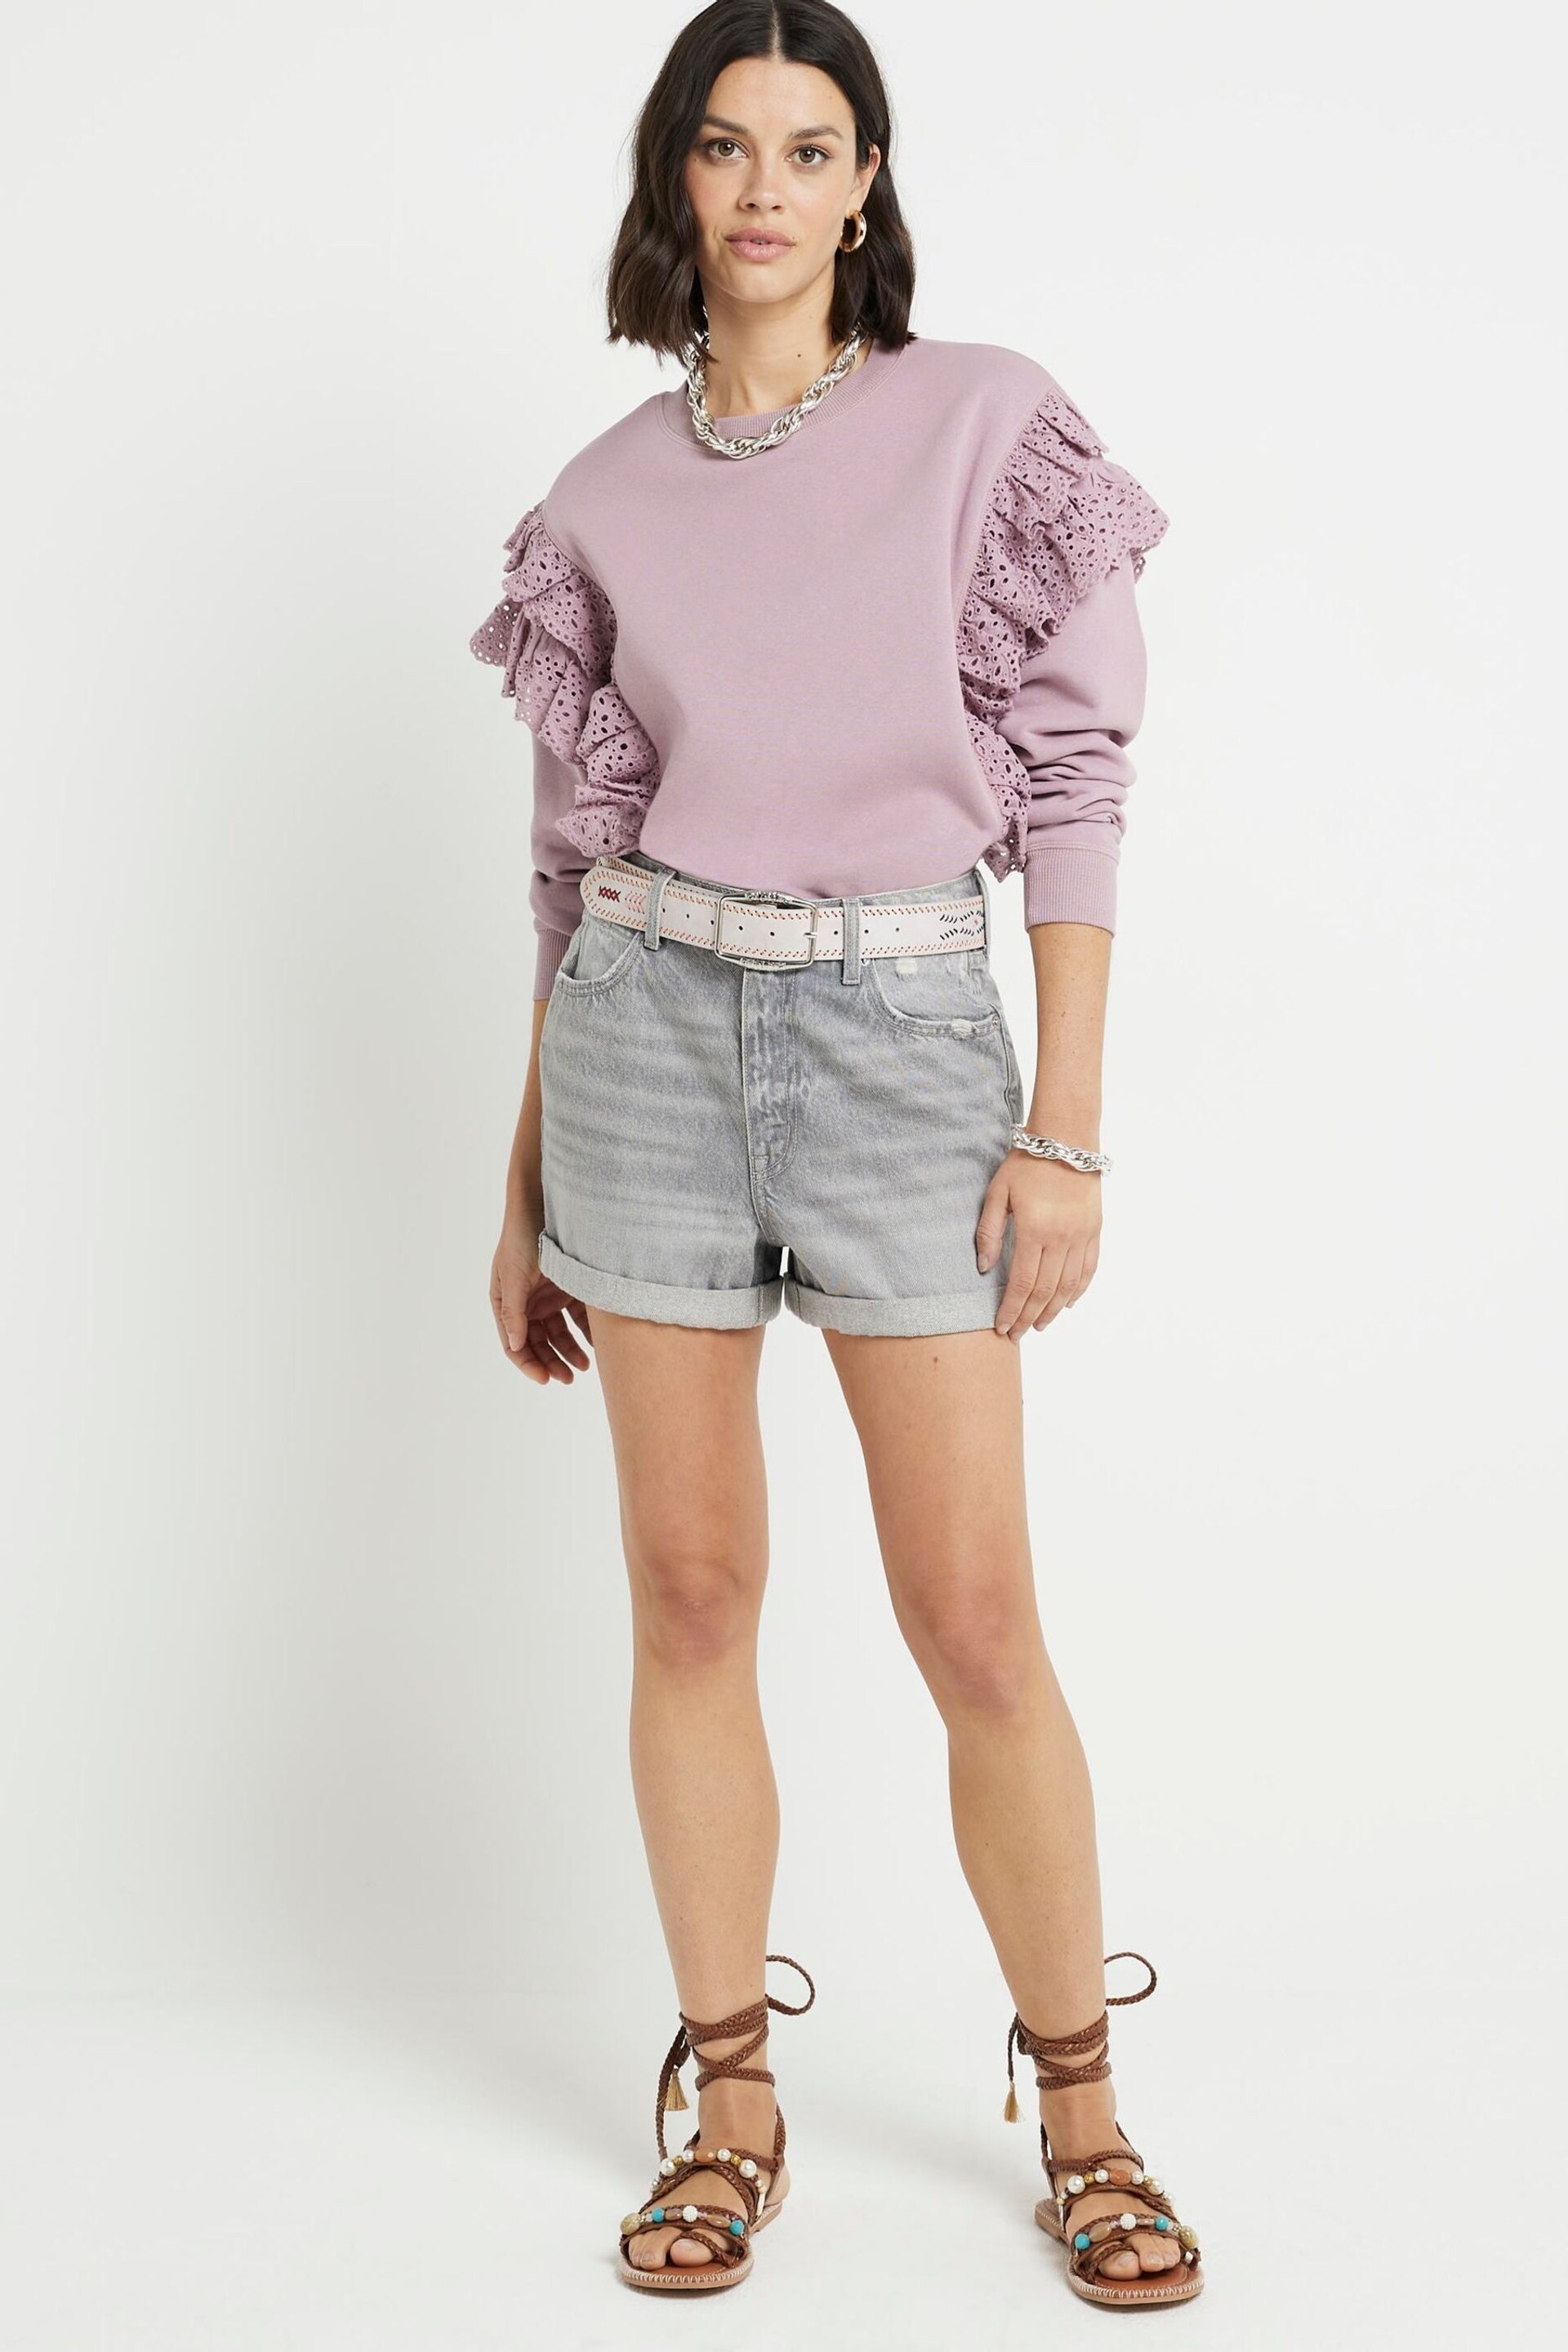 River Island Pink Broderie Frill Sweatshirt - Image 2 of 4